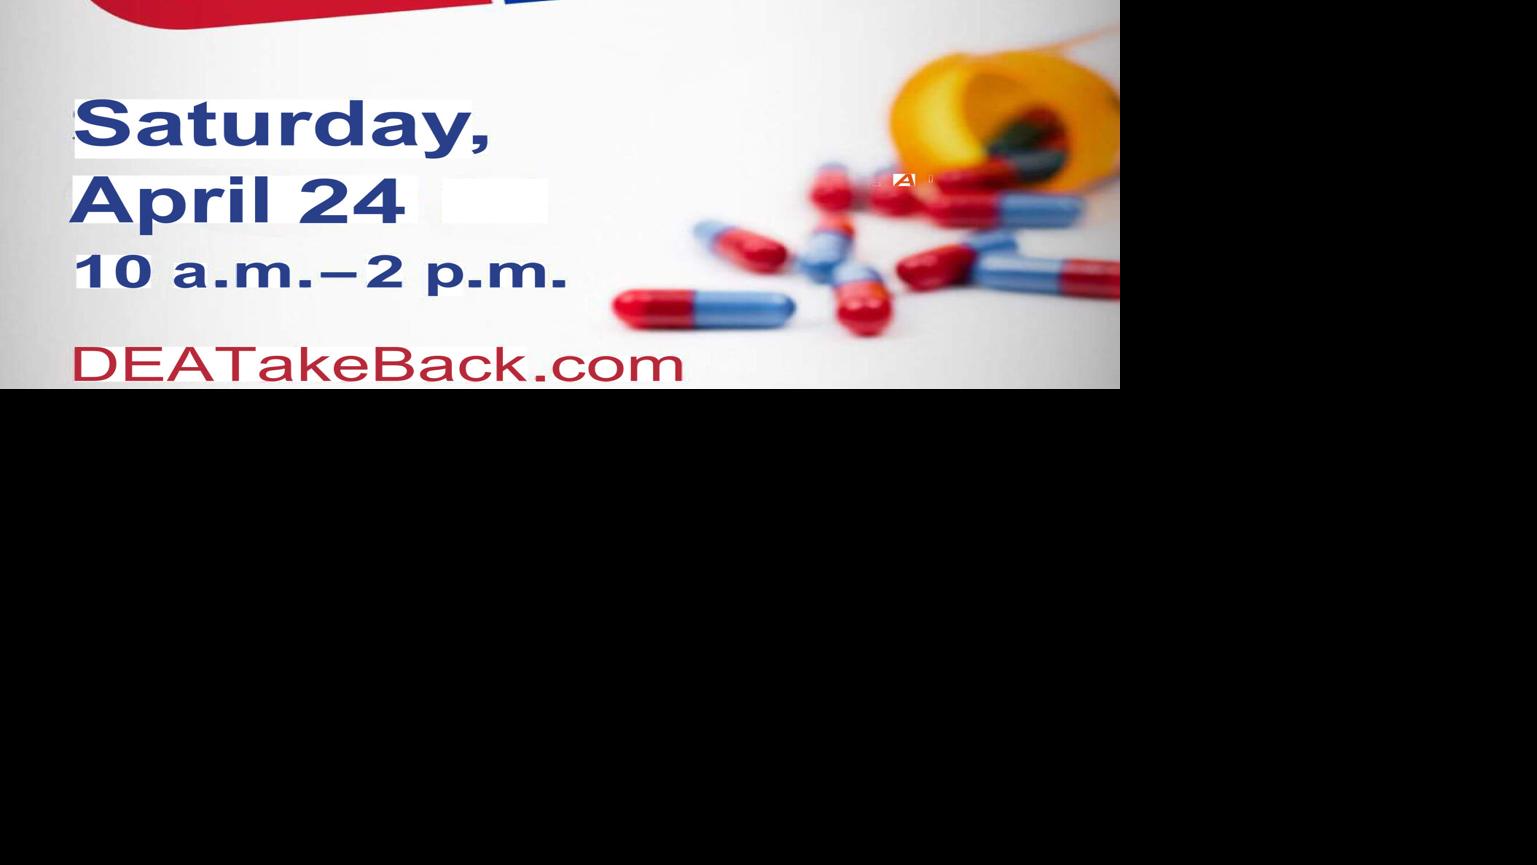 Florence Police to host drug take back stations Saturday